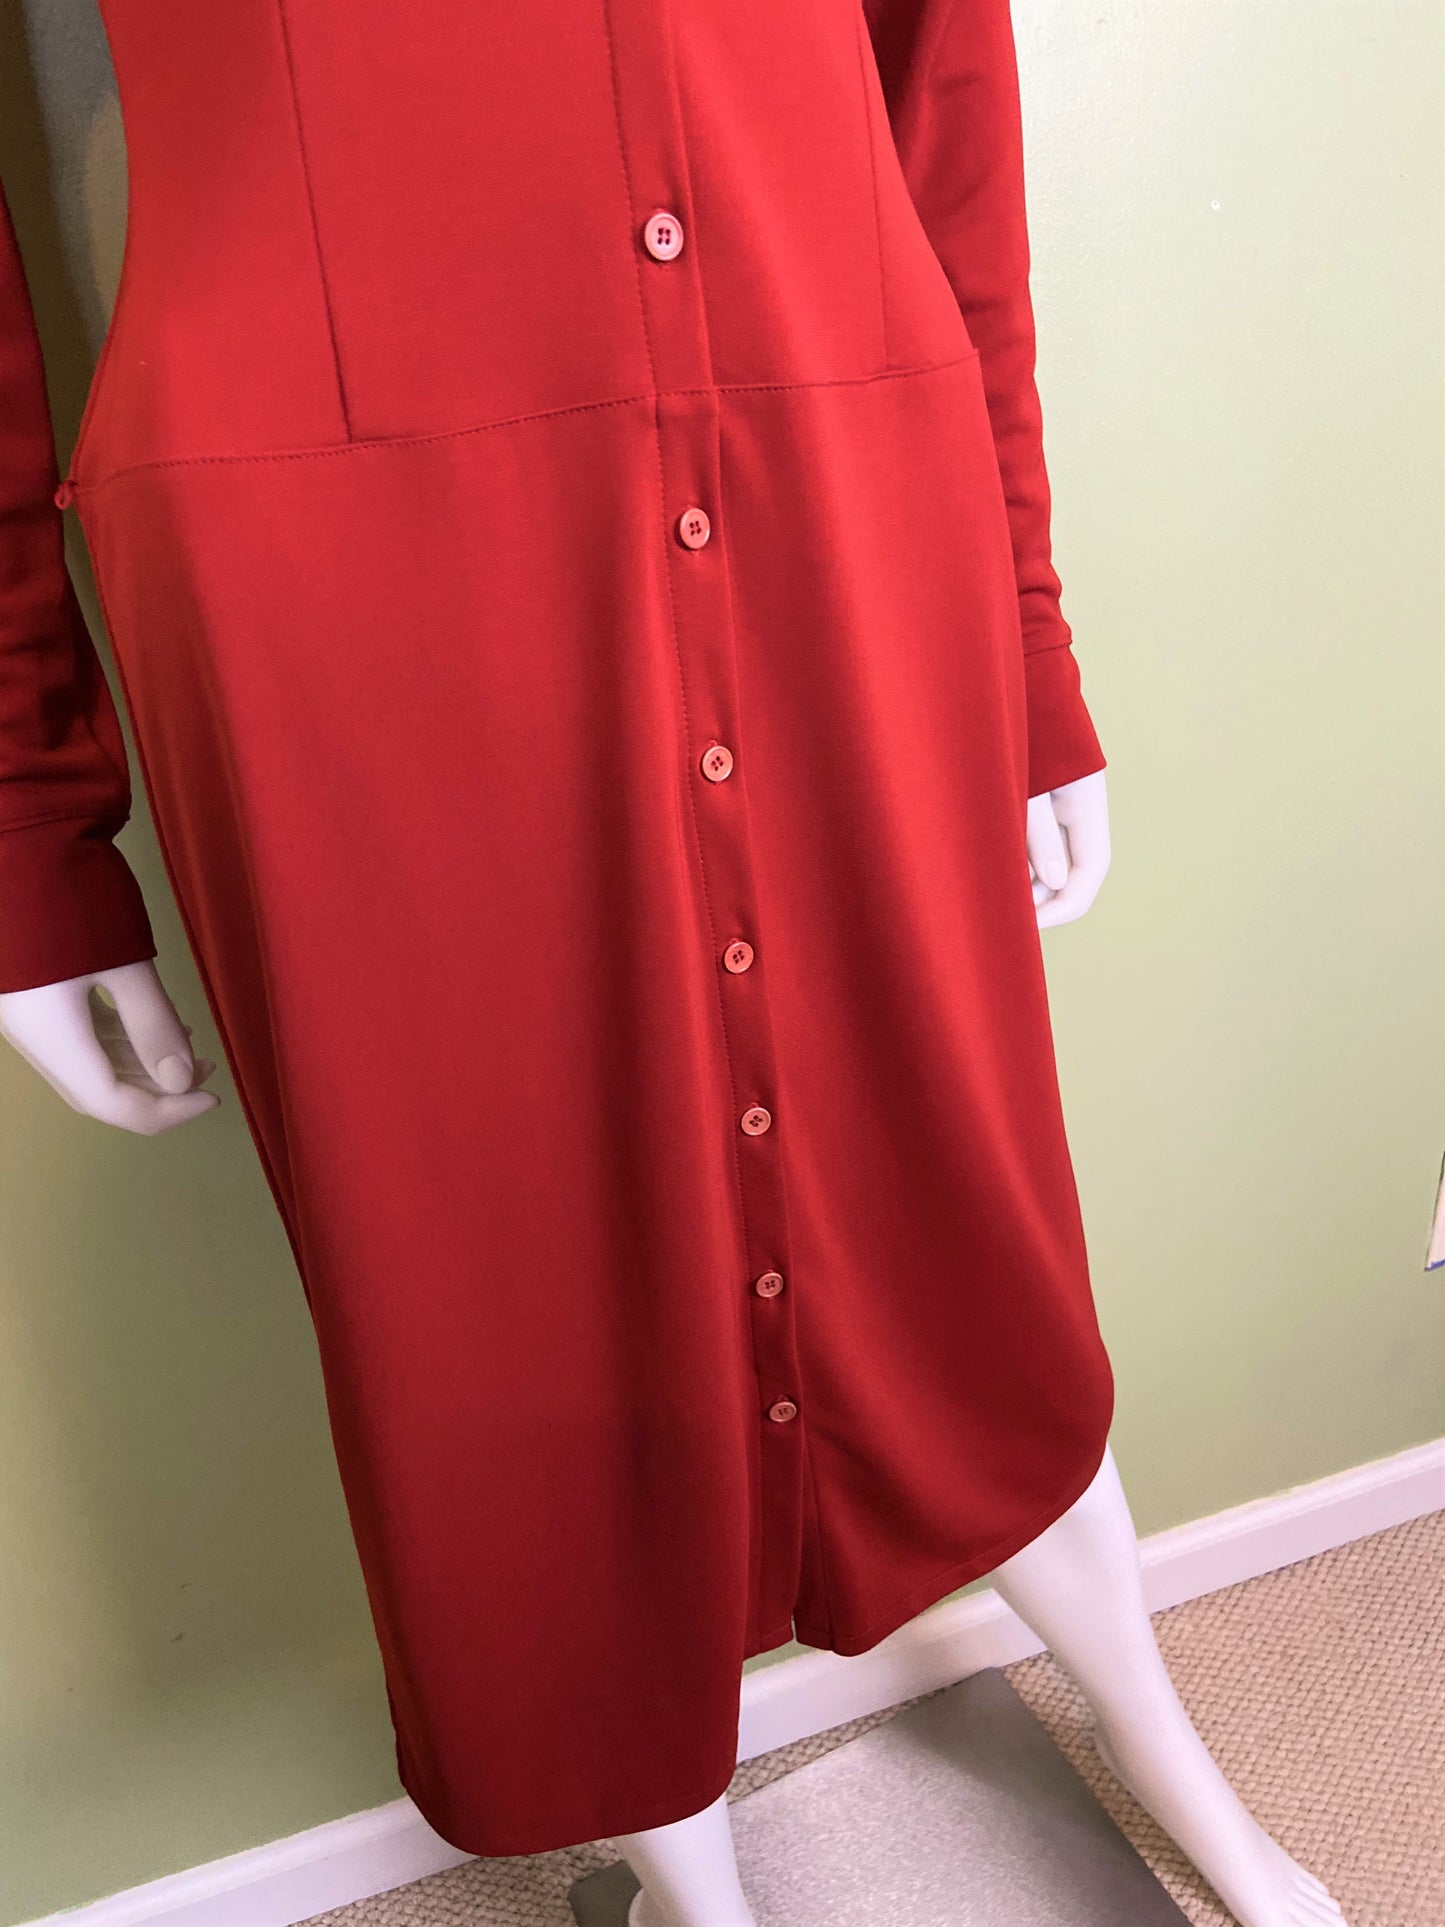 Kenneth Cole Red Button Down Shirt Dress